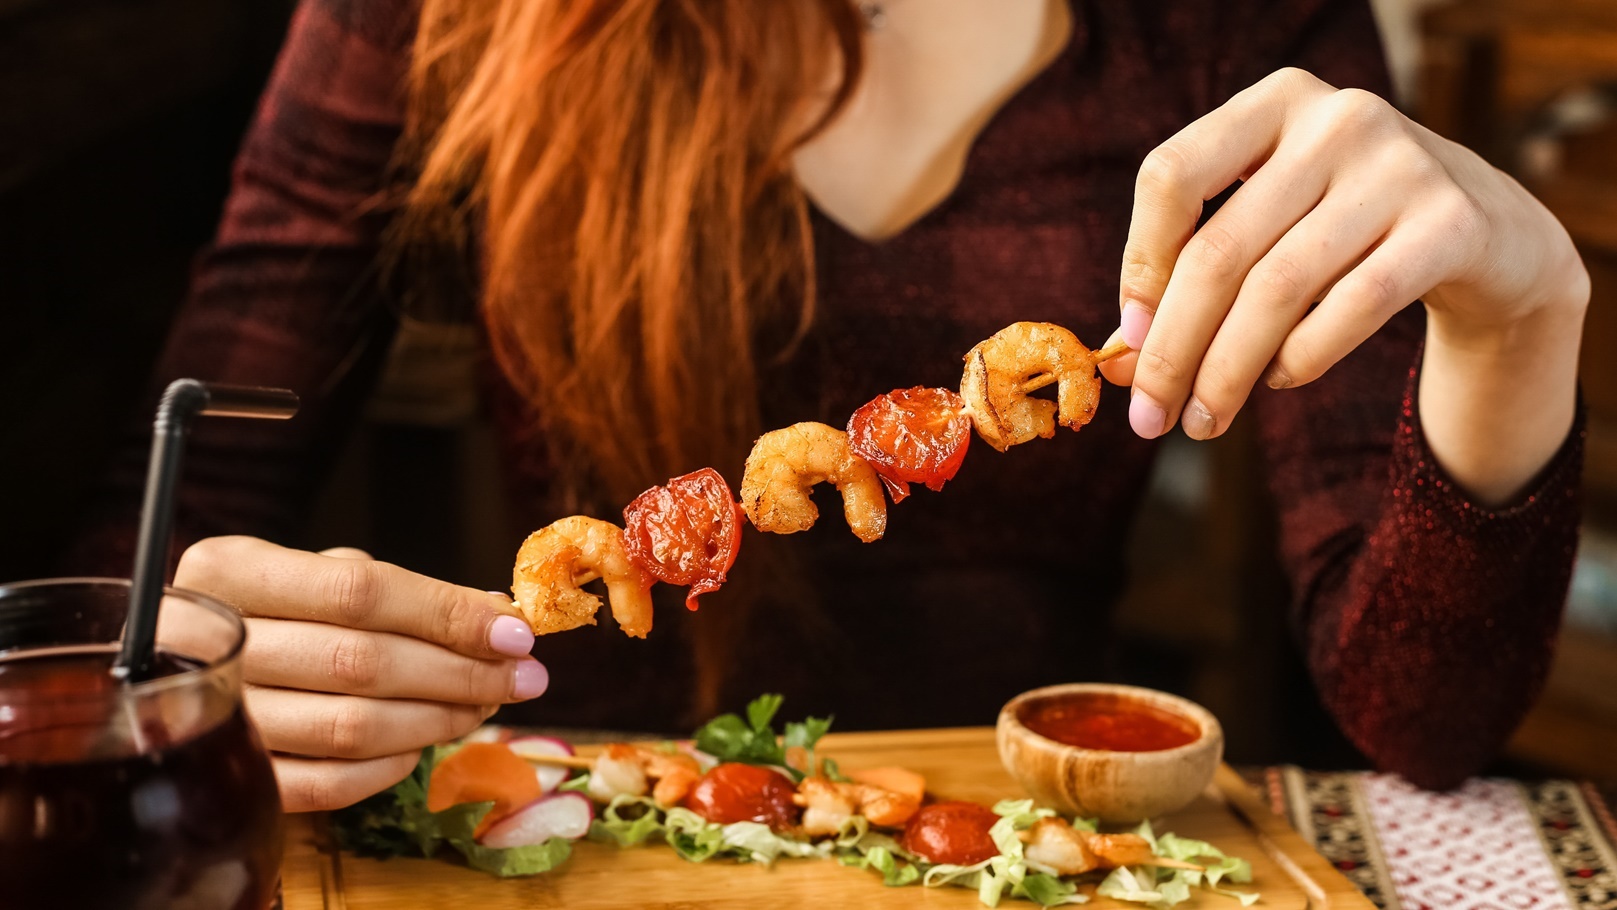 side-view-woman-eating-shrimp-on-a-skewer-with-veg-2021-08-31-16-11-54-utc